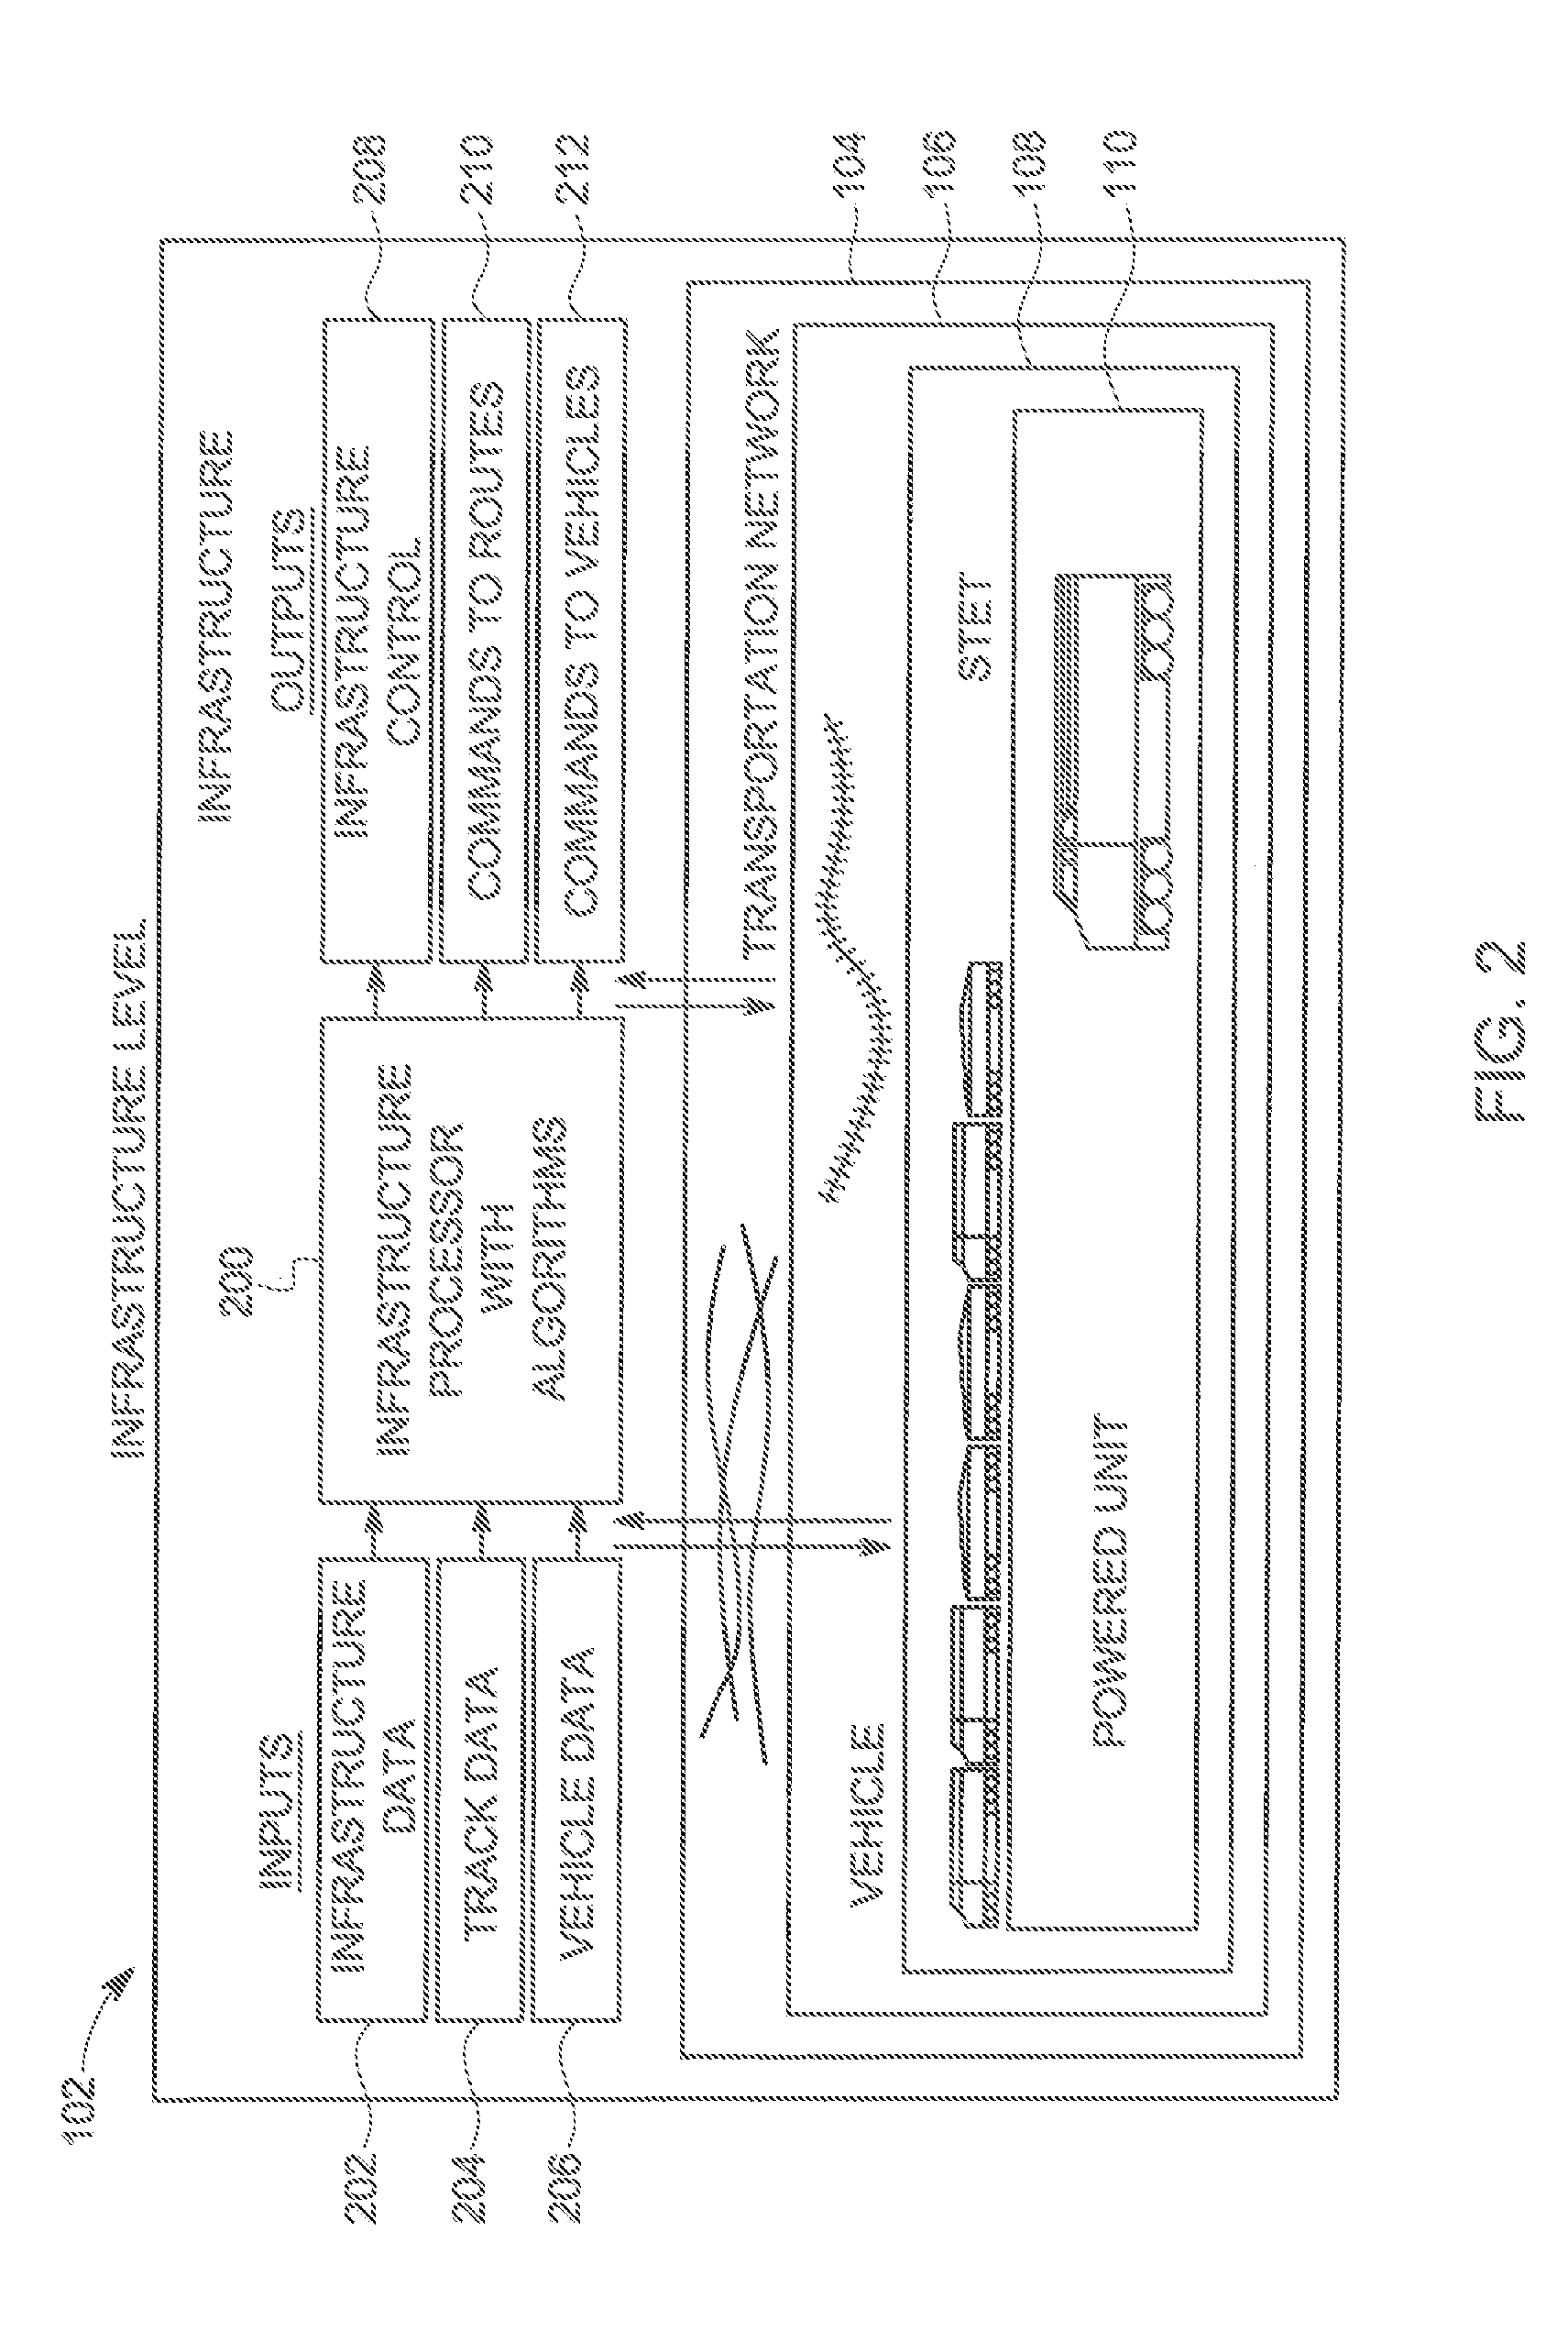 System and method for vehicle control